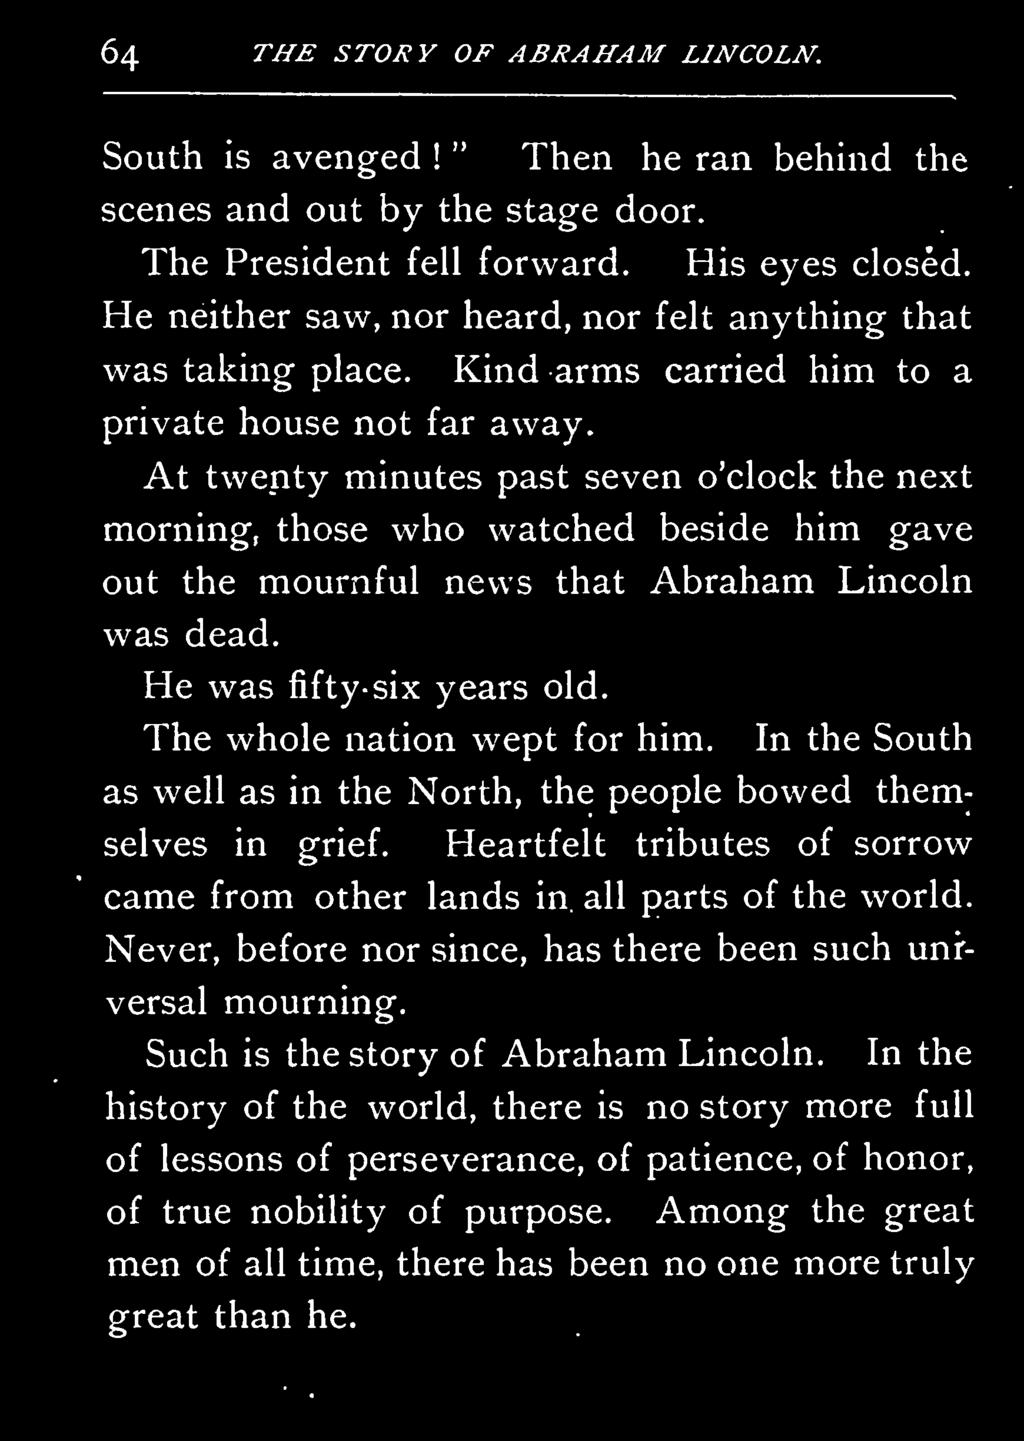 At twenty minutes past seven o'clock the next morning, those who watched beside him gave out the mournful news that Abraham Lincoln was dead. He was fifty-six years old. The whole nation wept for him.